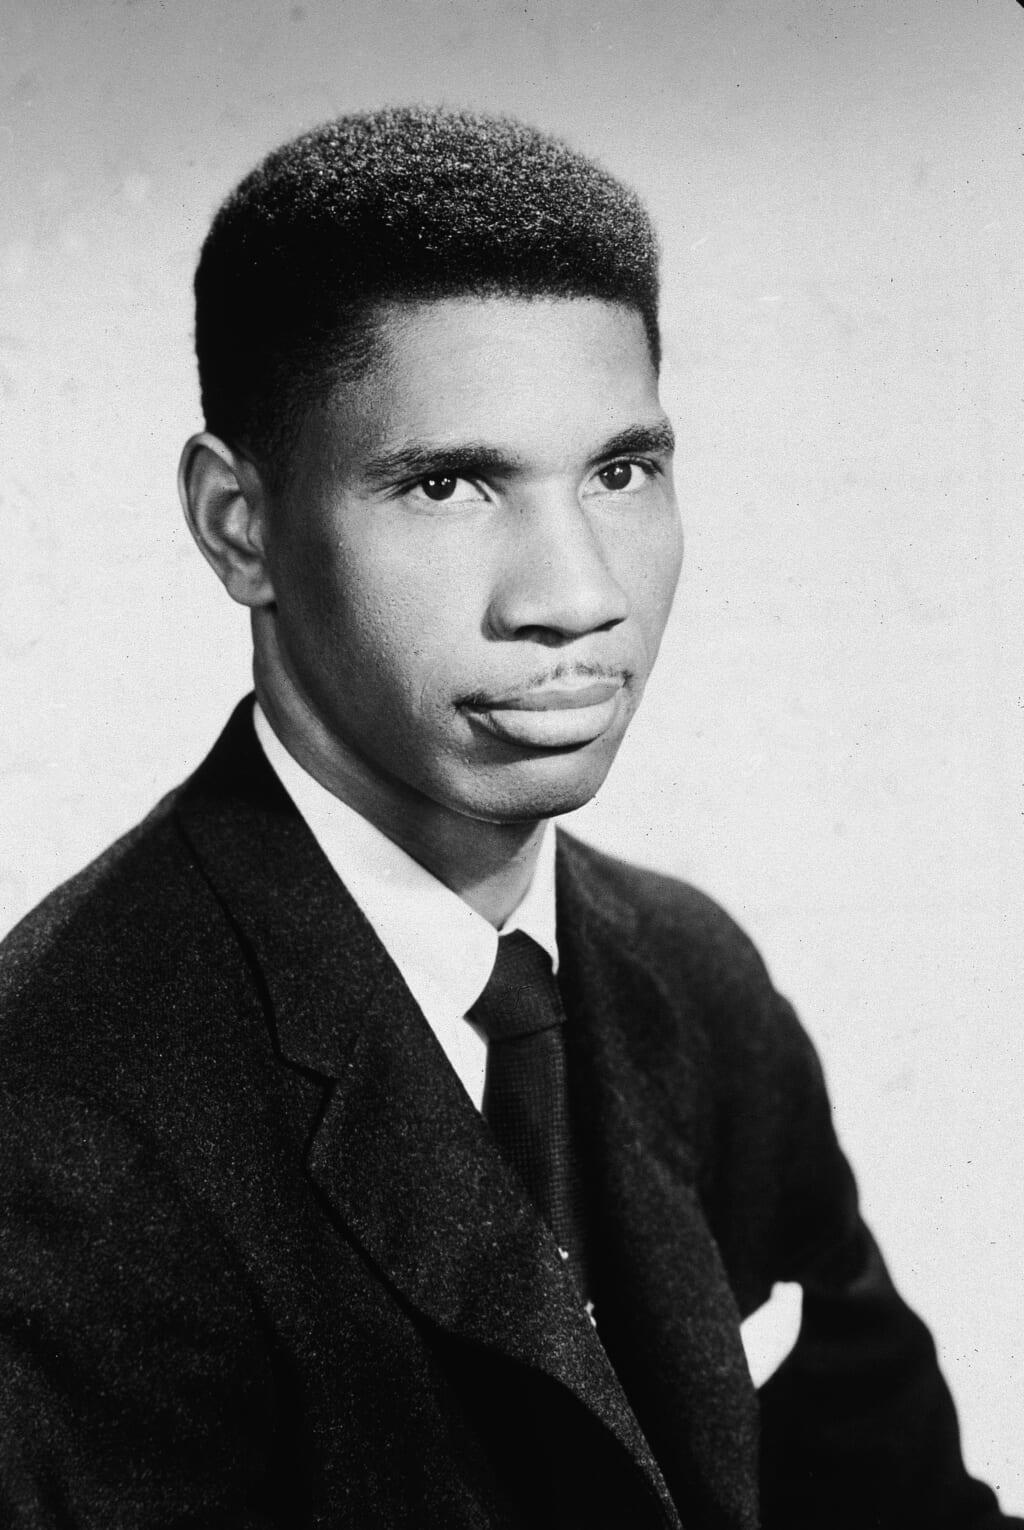 Studio portrait of slain American civil rights activist Medgar Evers (1925 – 1963) early 1960s. (Photo by Hulton Archive/Getty Images)